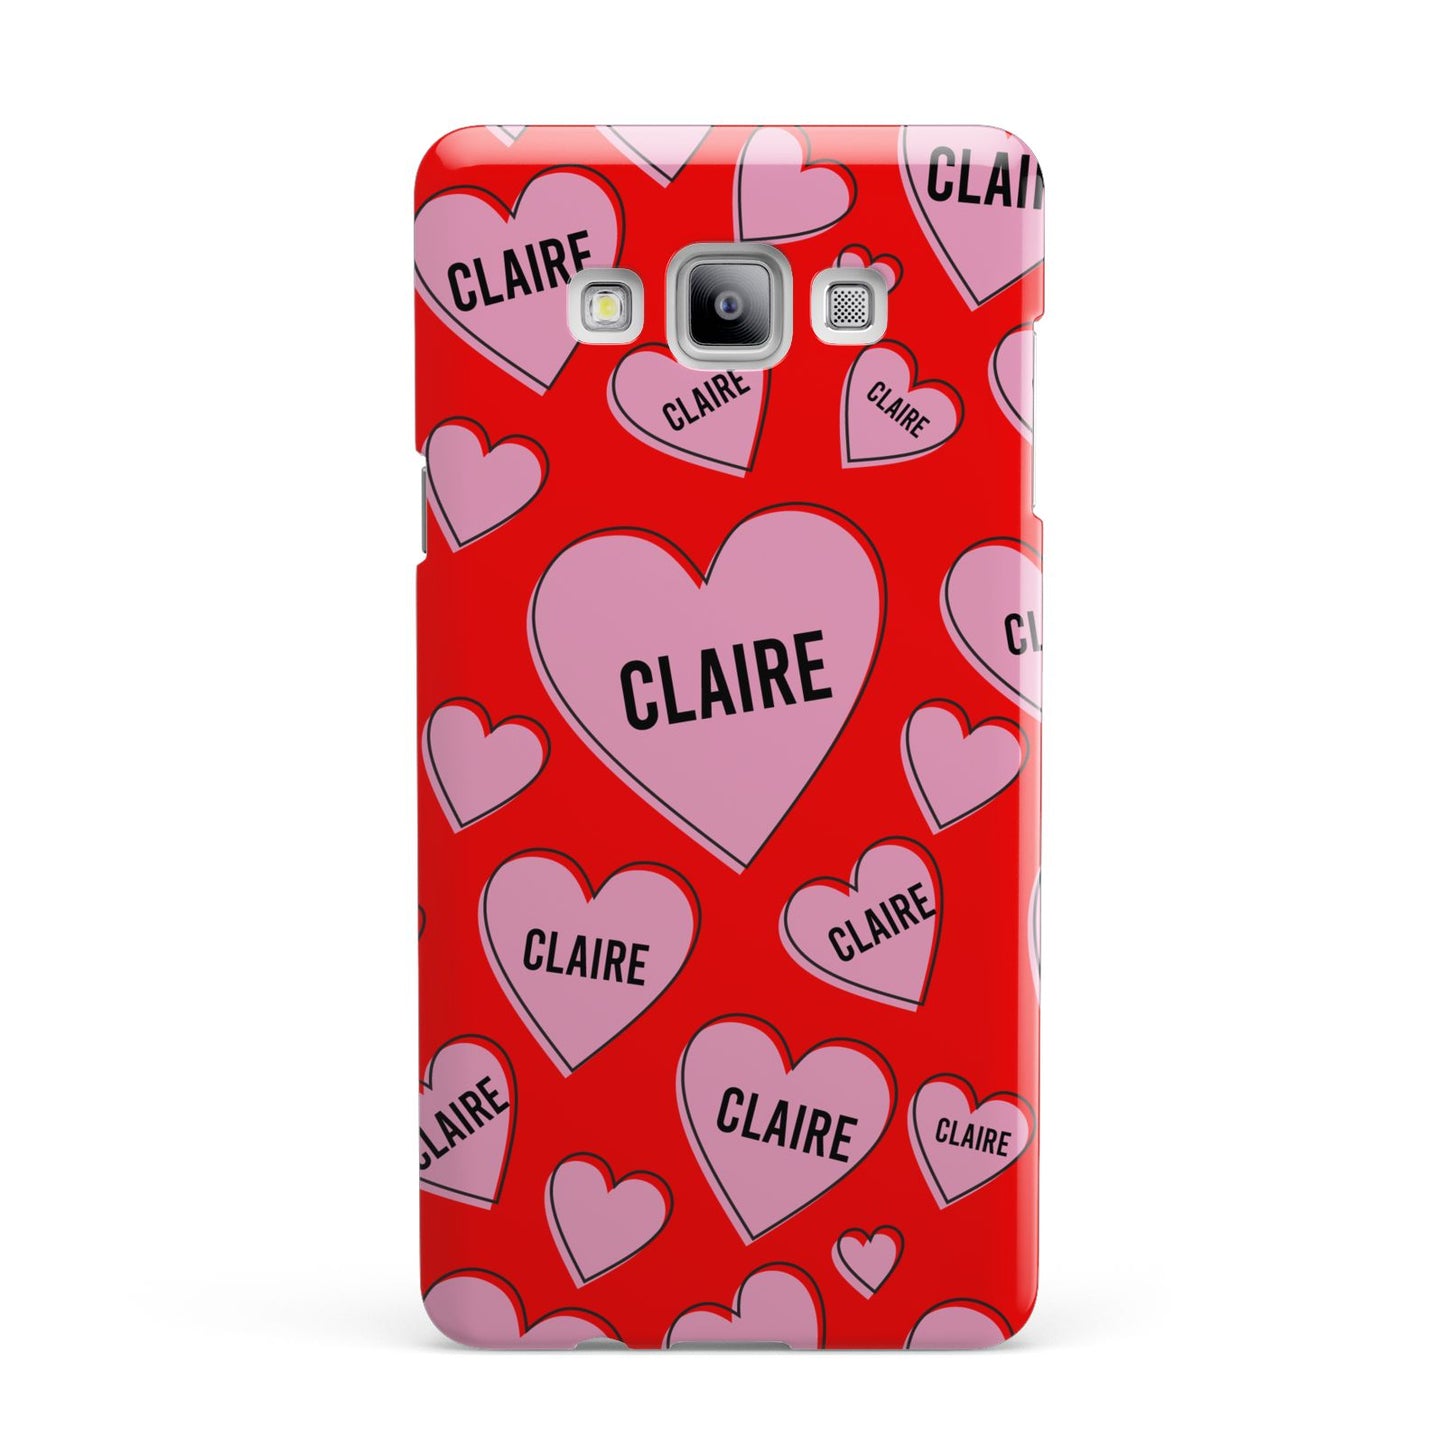 Personalised Hearts Samsung Galaxy A7 2015 Case